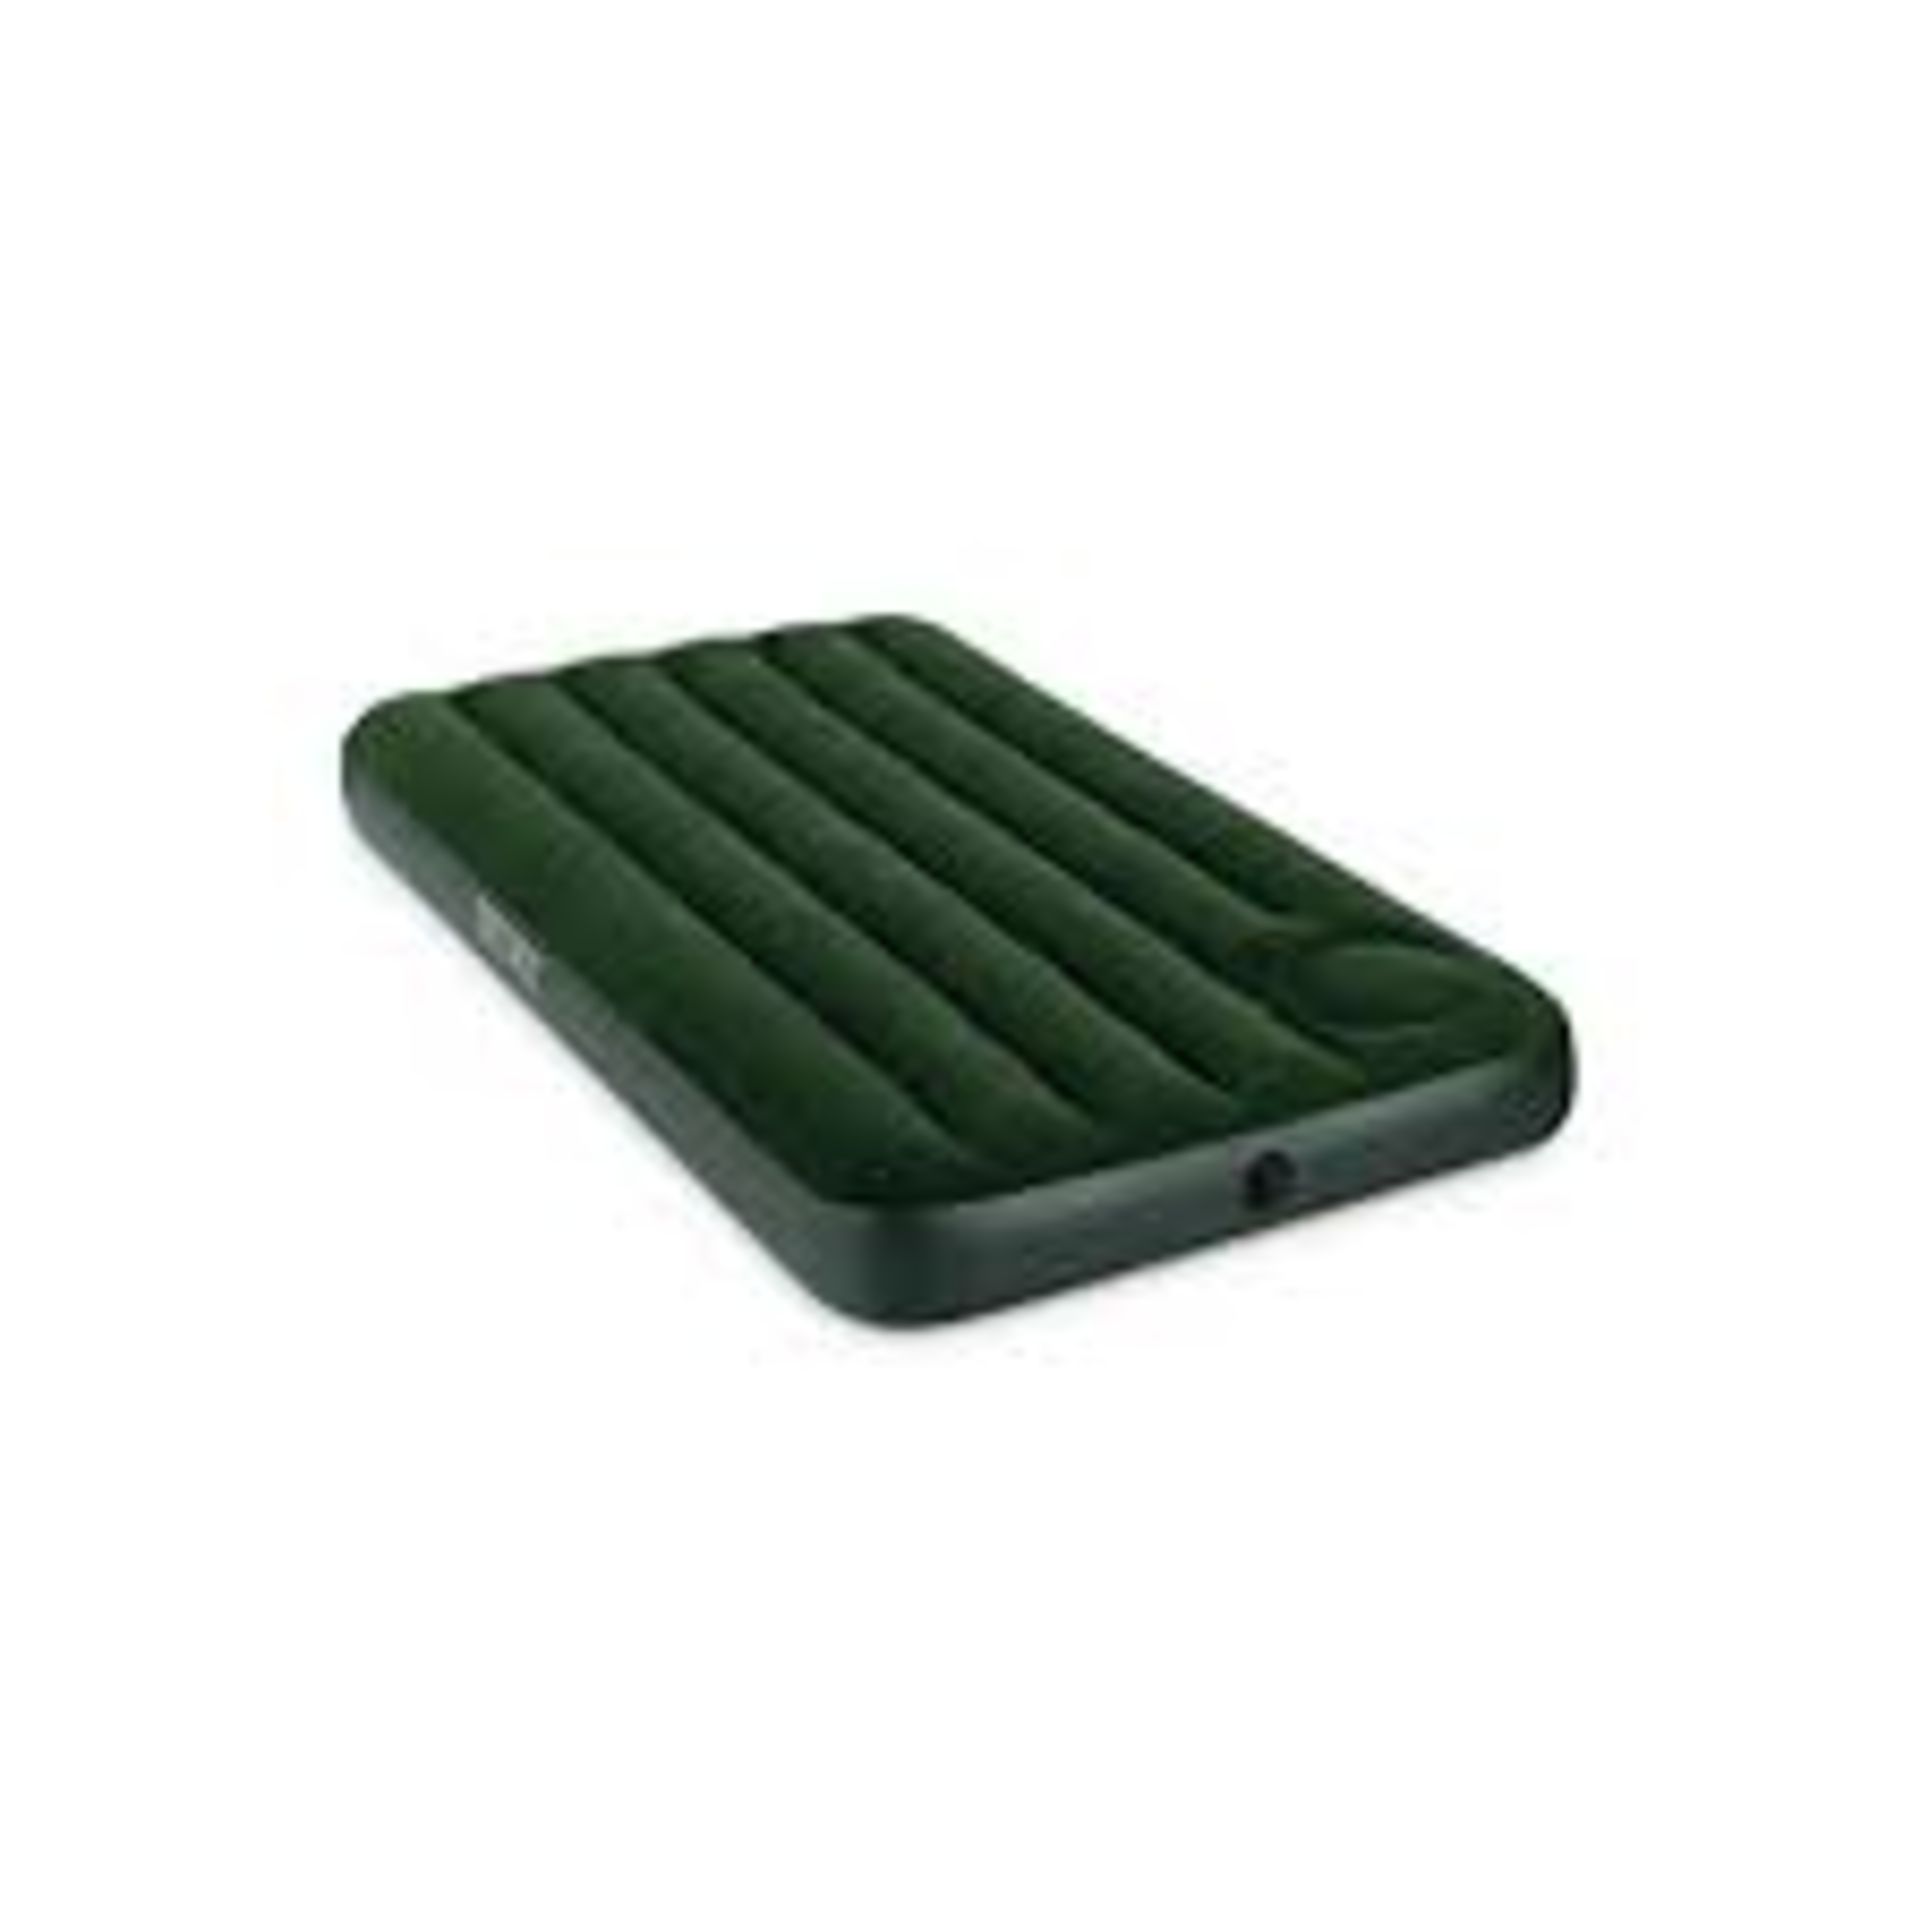 + VAT Brand New Intex Airbed With Built In Foot Pump - ISP Â£14.99 (Group On)